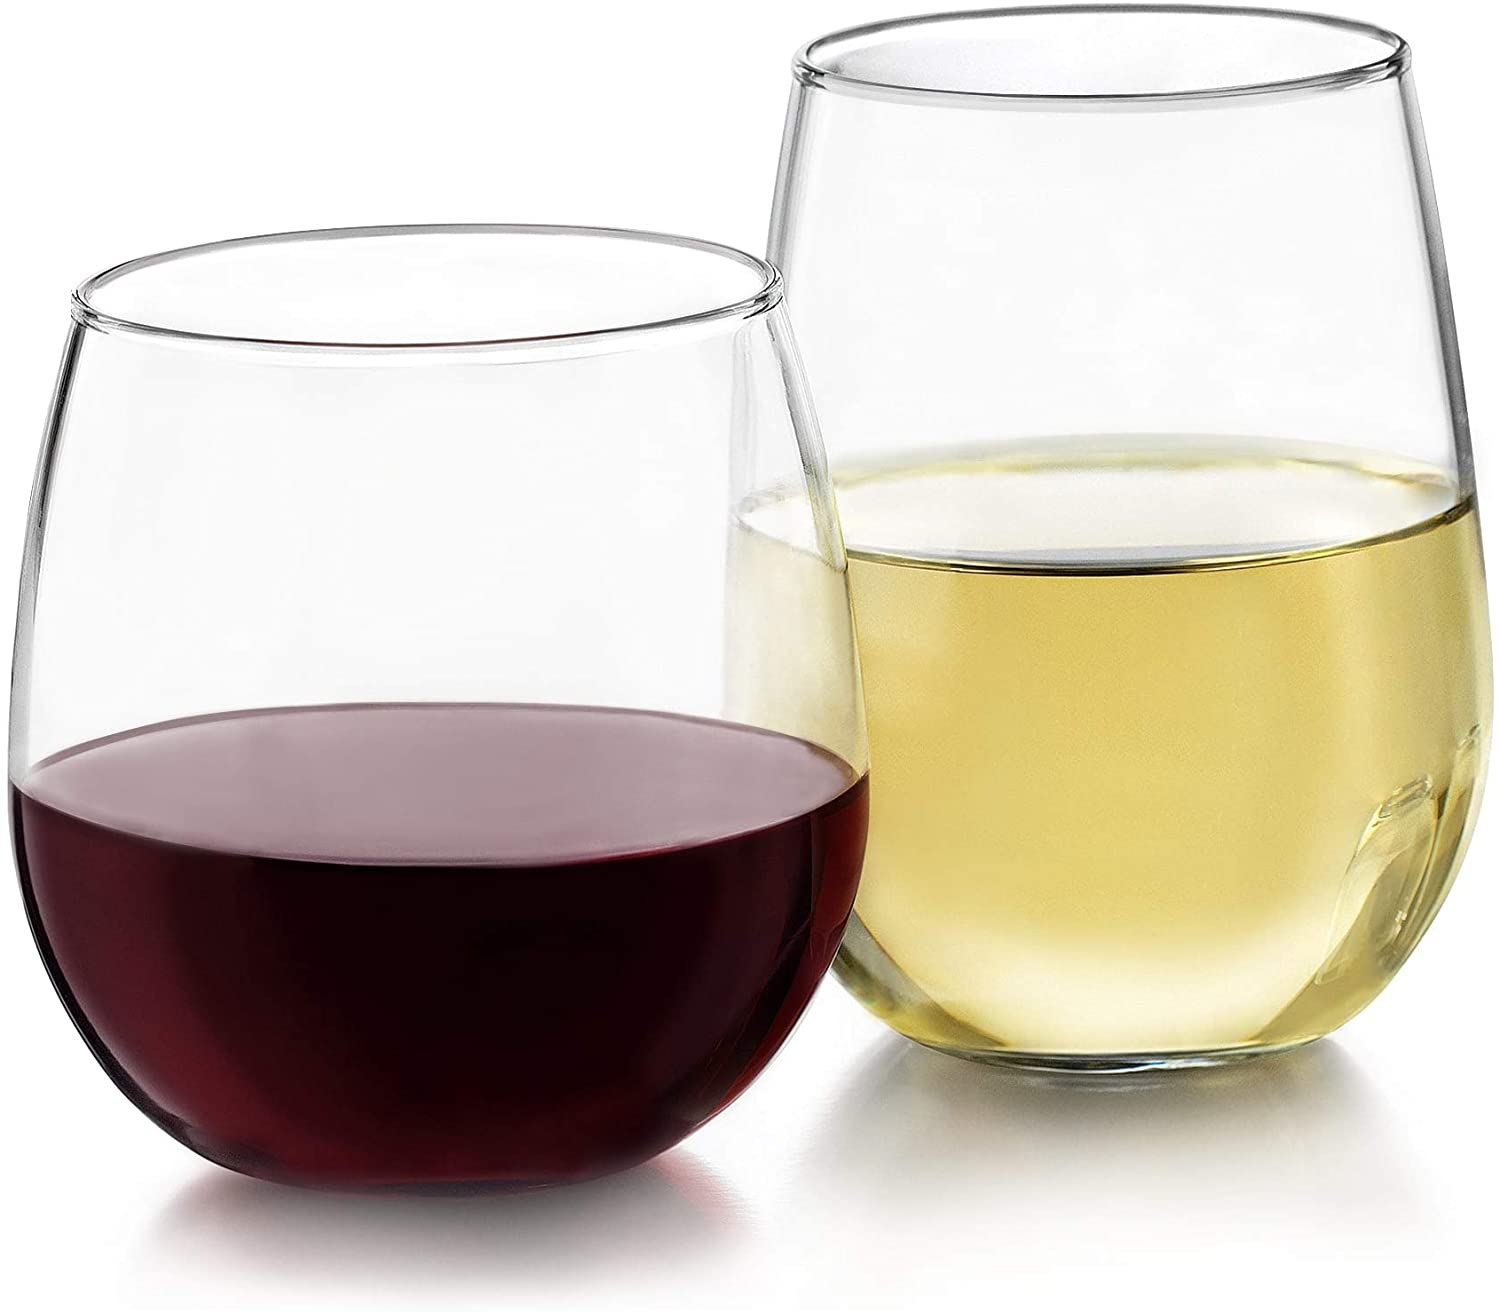 Top 10 Best Stemless Wine Glasses In 2021